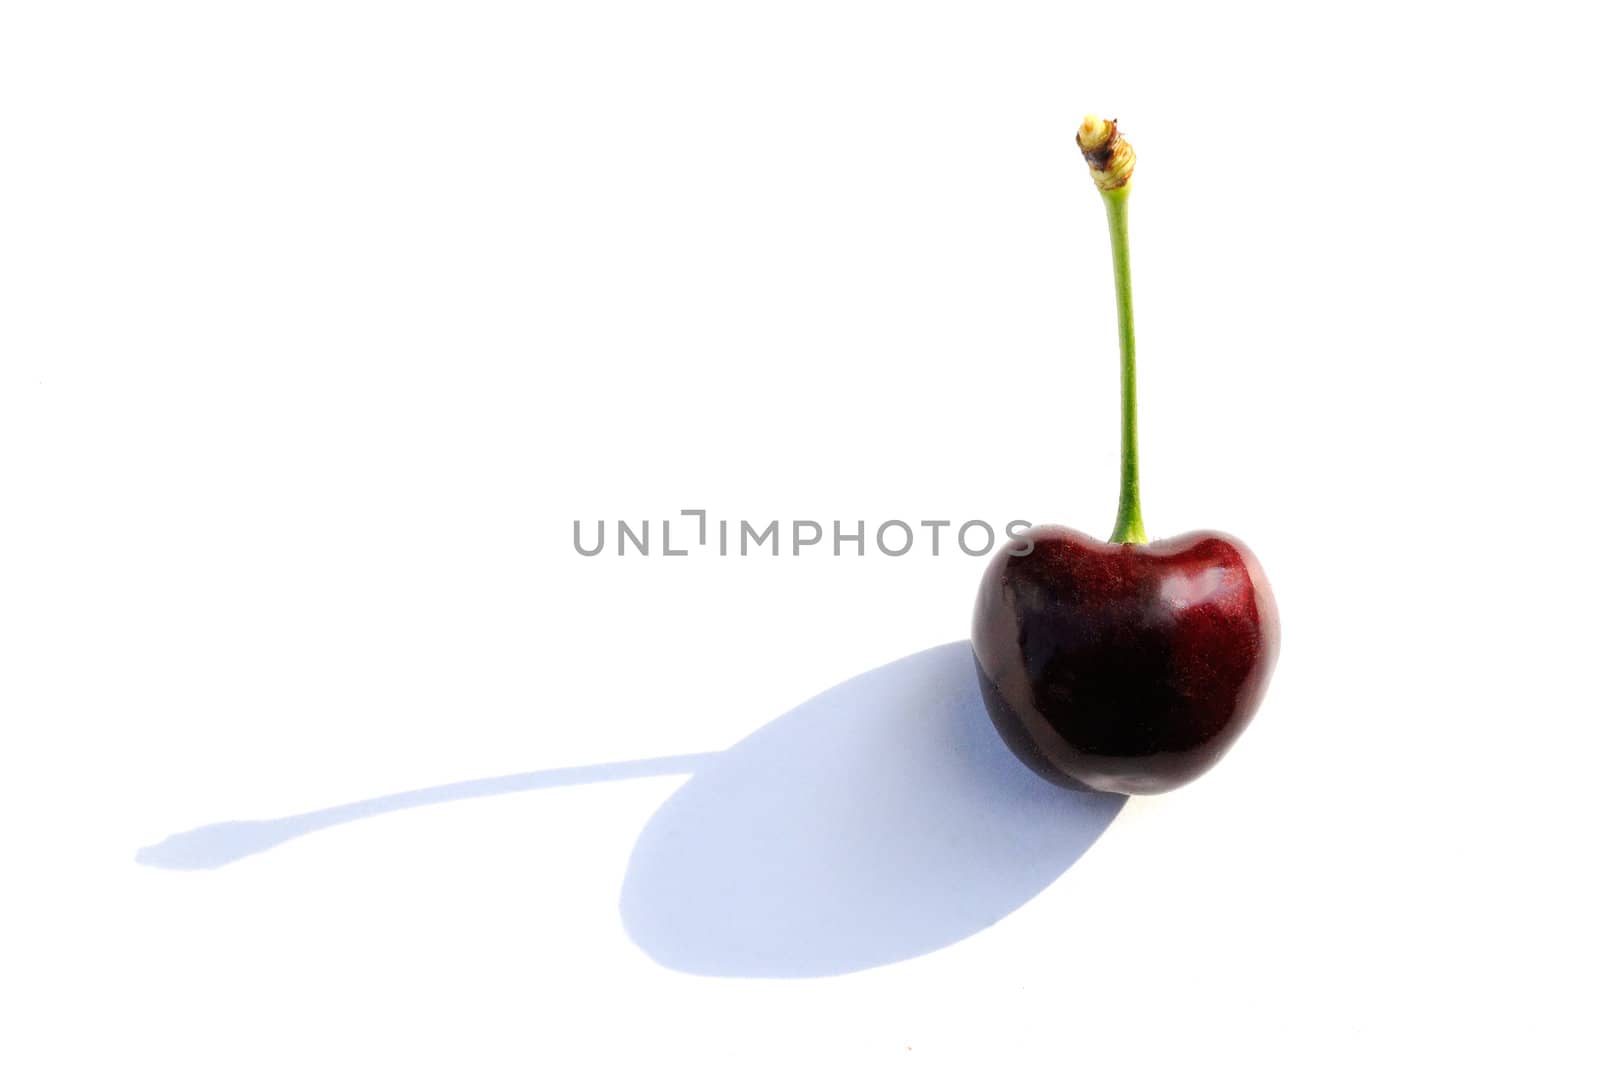 Red cherry �n a white background